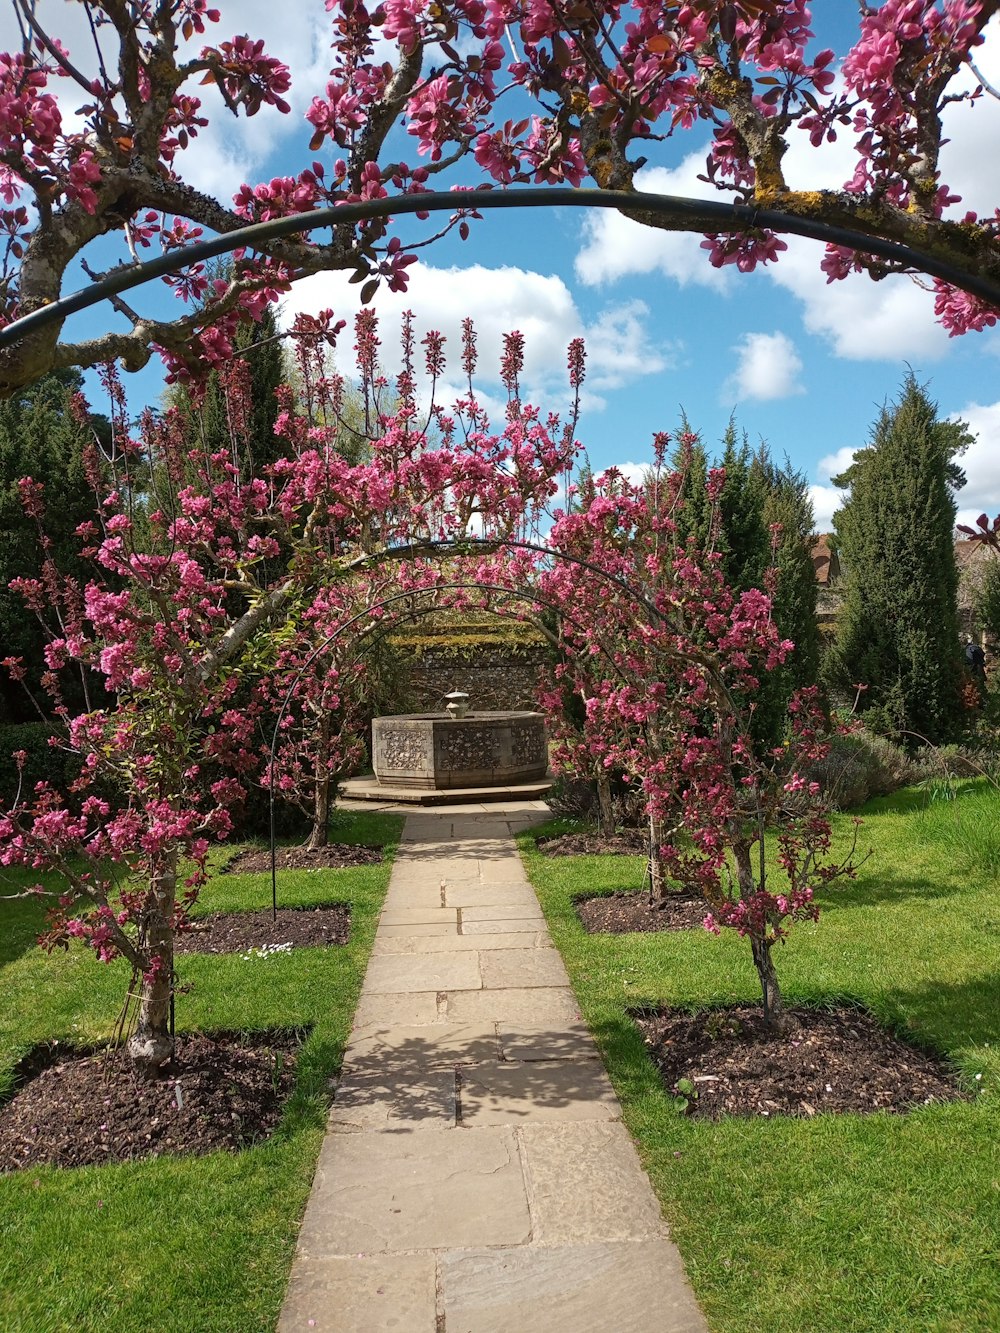 a walkway in a park with pink flowers on the trees